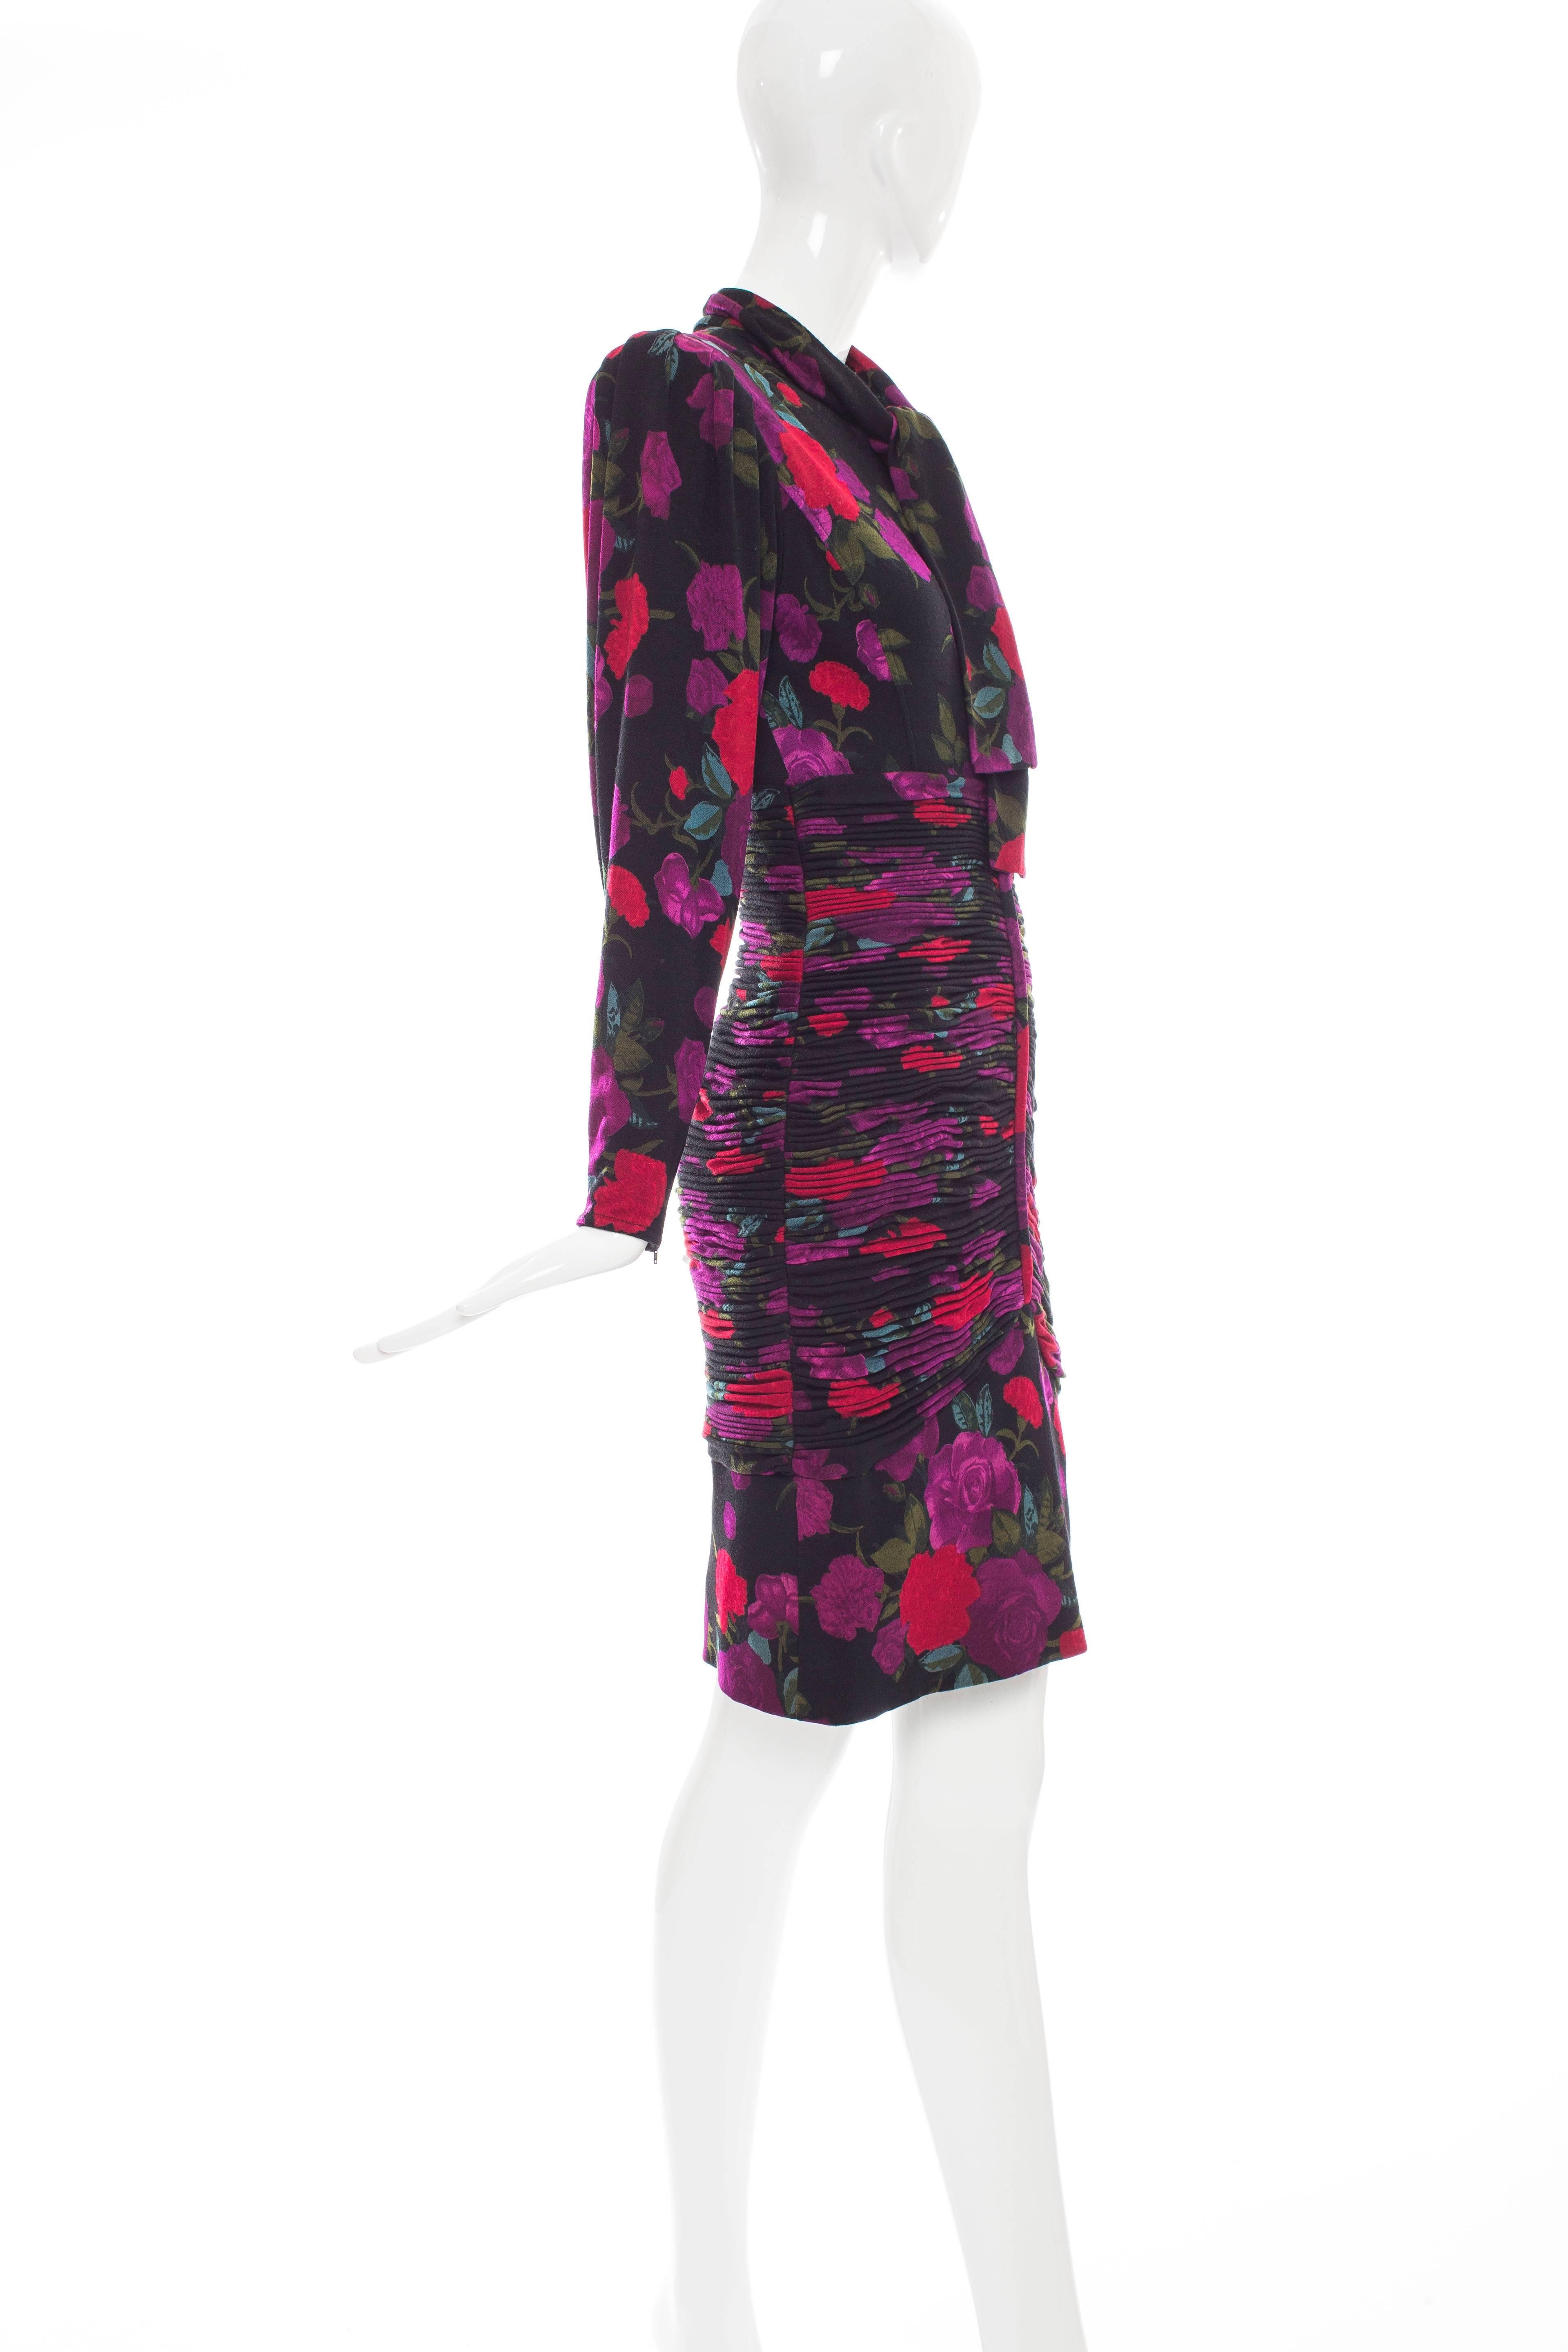 Emanuel Ungaro Floral Wool Jersey Ruched Dress, Circa 1980's For Sale 1